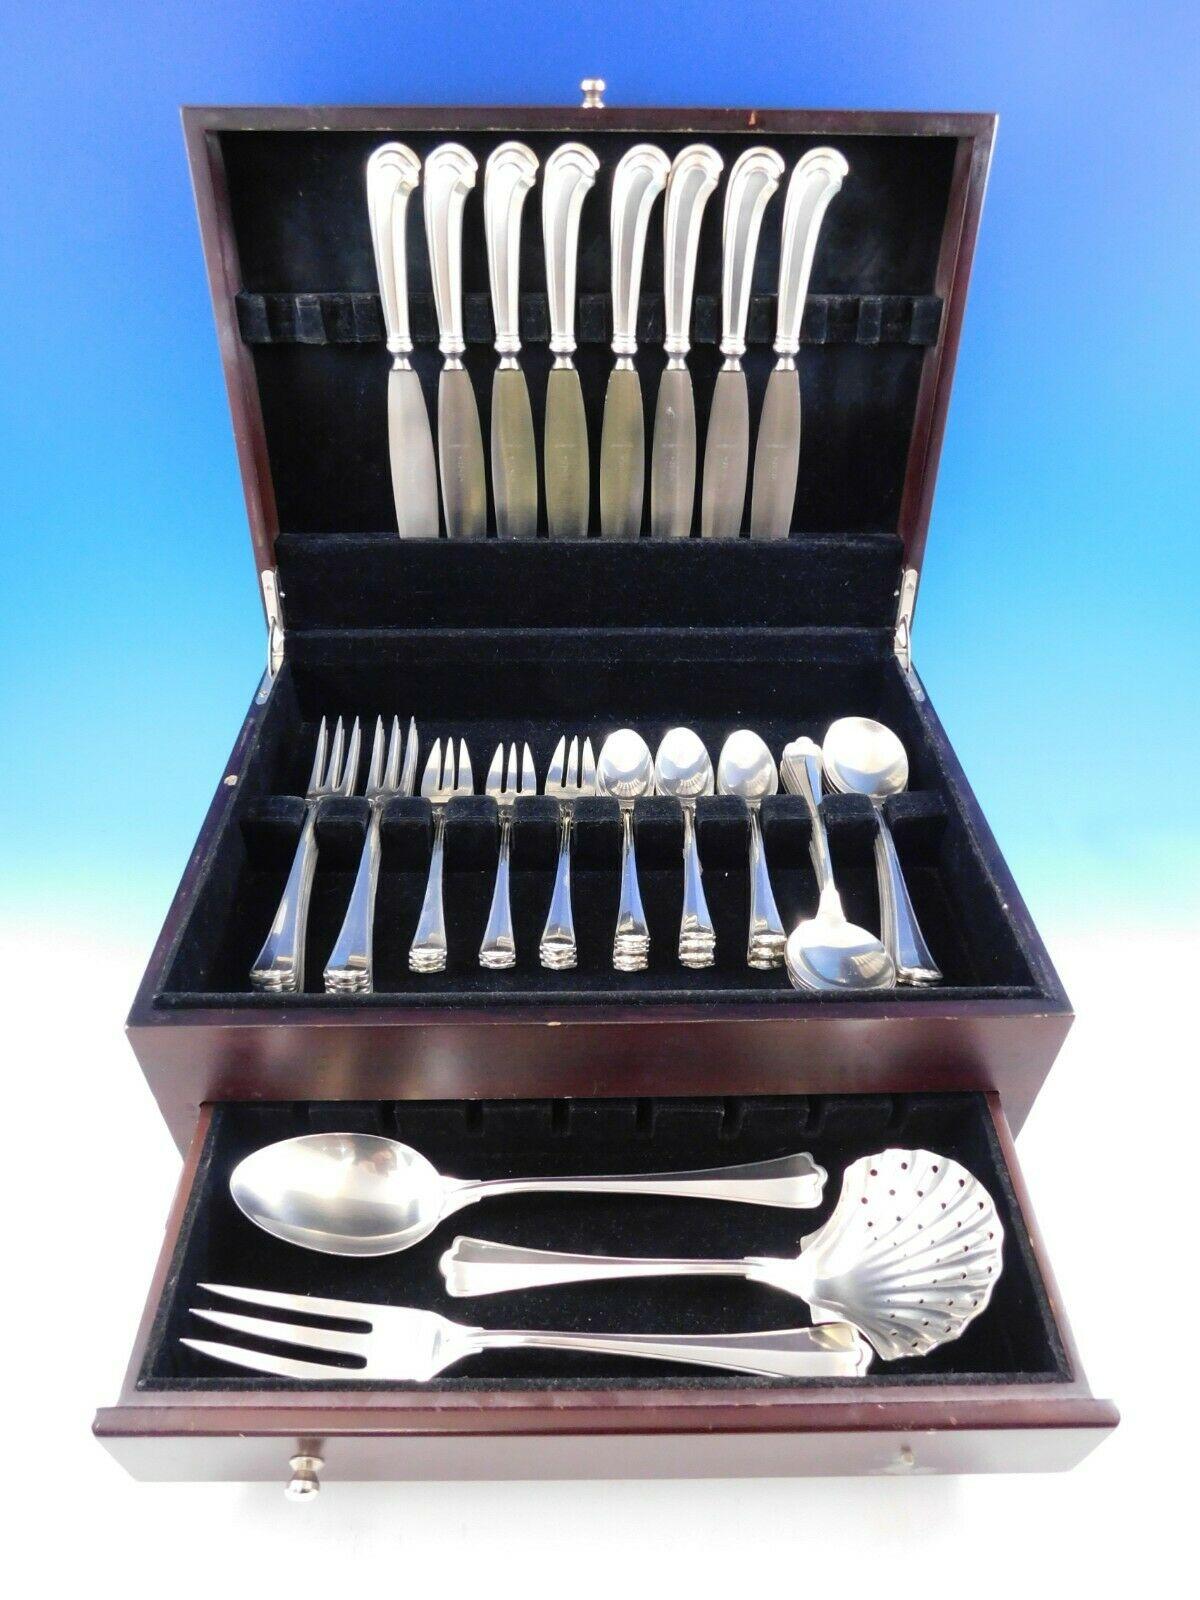 The house of Buccellati is one of the world's premier silversmiths.

Superb dinner size saint mark by Buccellati Italy sterling silver flatware set, 51 pieces. This set includes:

8 dinner size knives, 10